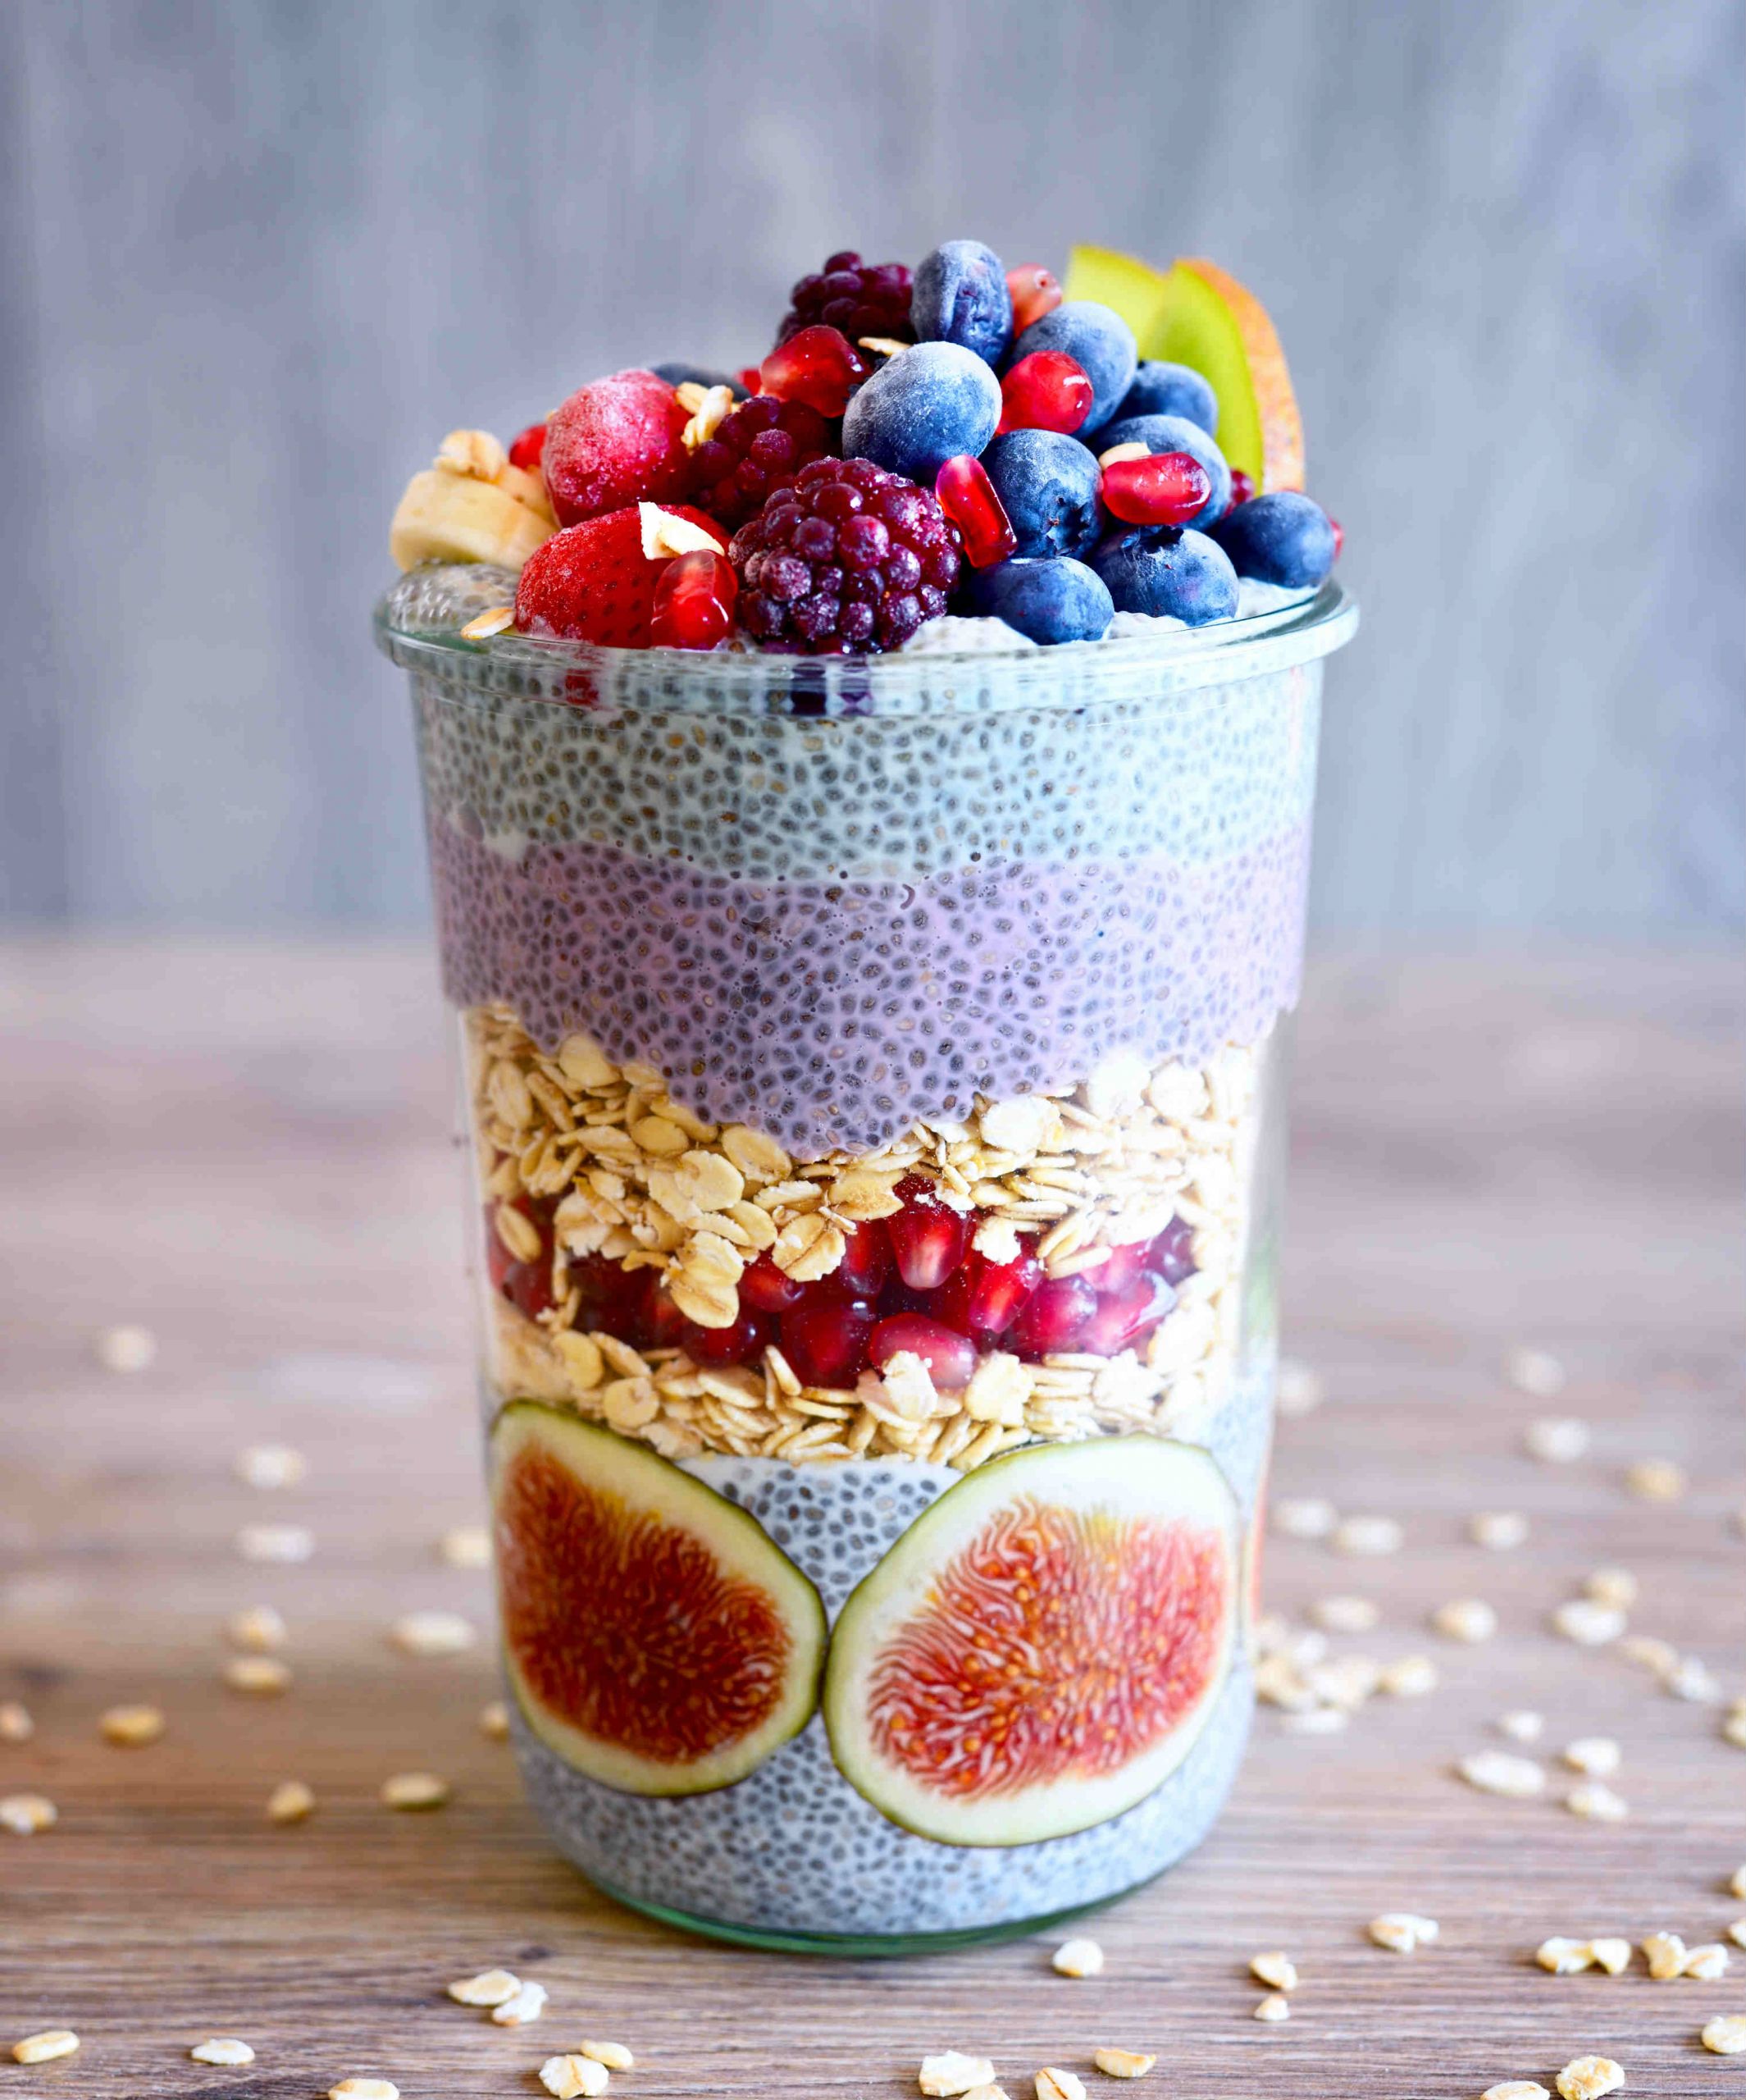 Chia Seeds Breakfast Recipes
 15 Healthy Chia Seed Pudding Recipes That Taste Like